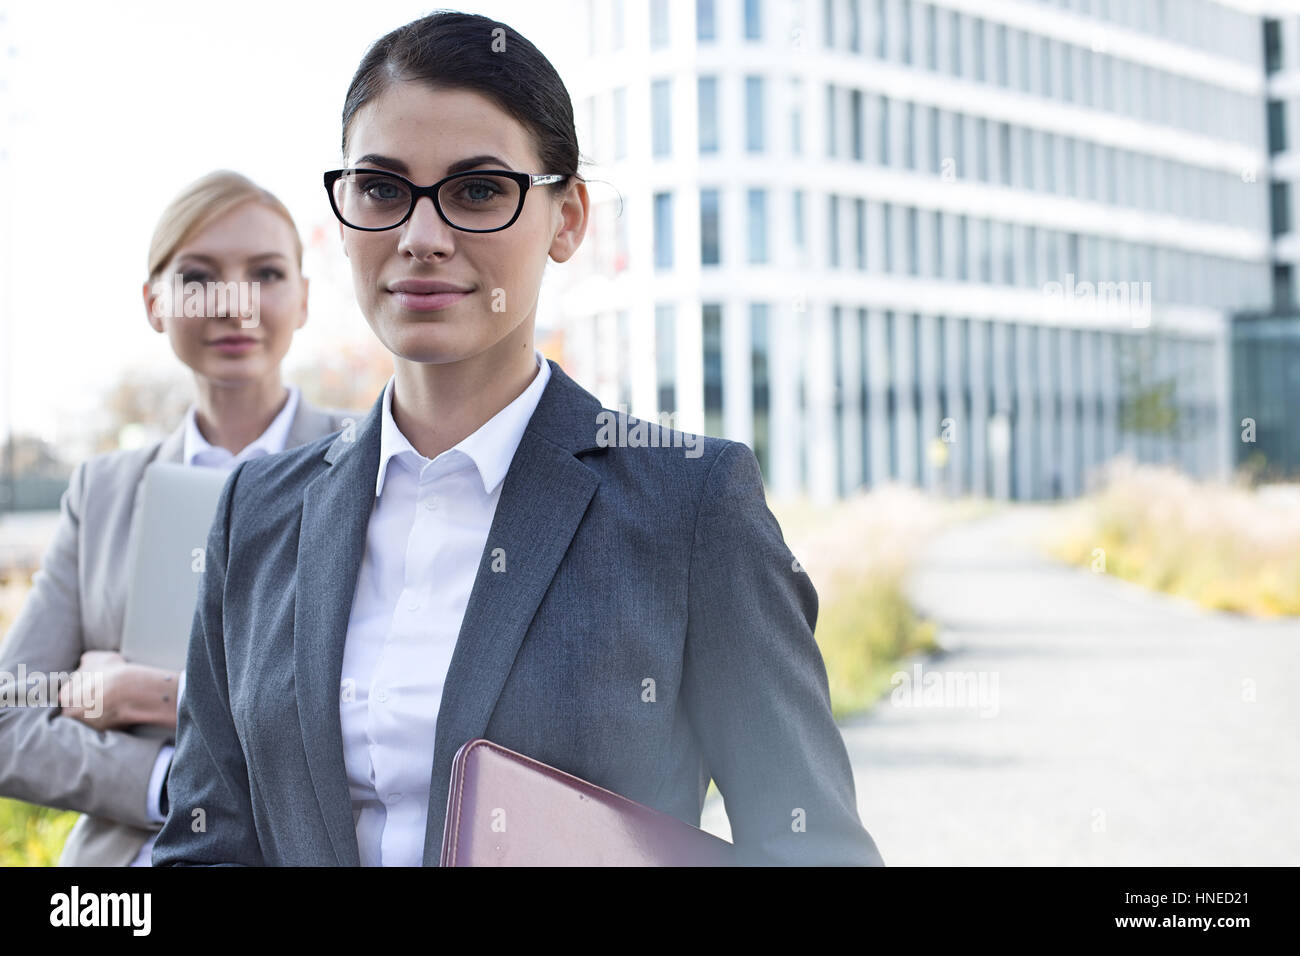 Portrait of smiling businesswoman with colleague in background Banque D'Images